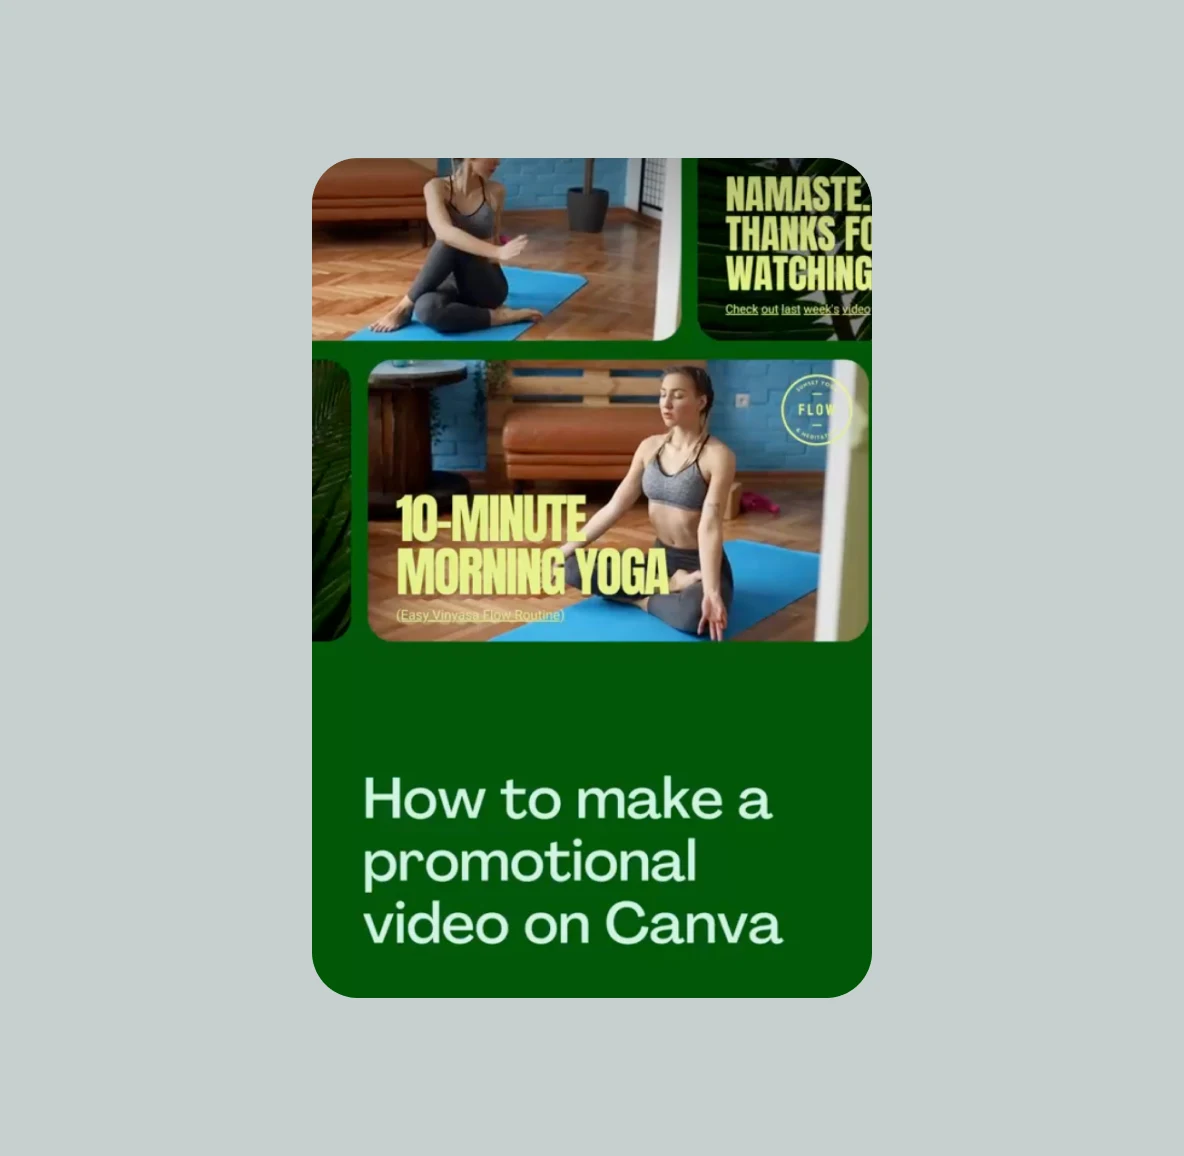 A dark green idea from Canva that reads "How to make a promotional video on Canva." Pictured behind the text is a screenshot of a younger white woman practicing a 10-minute morning yoga routine.   